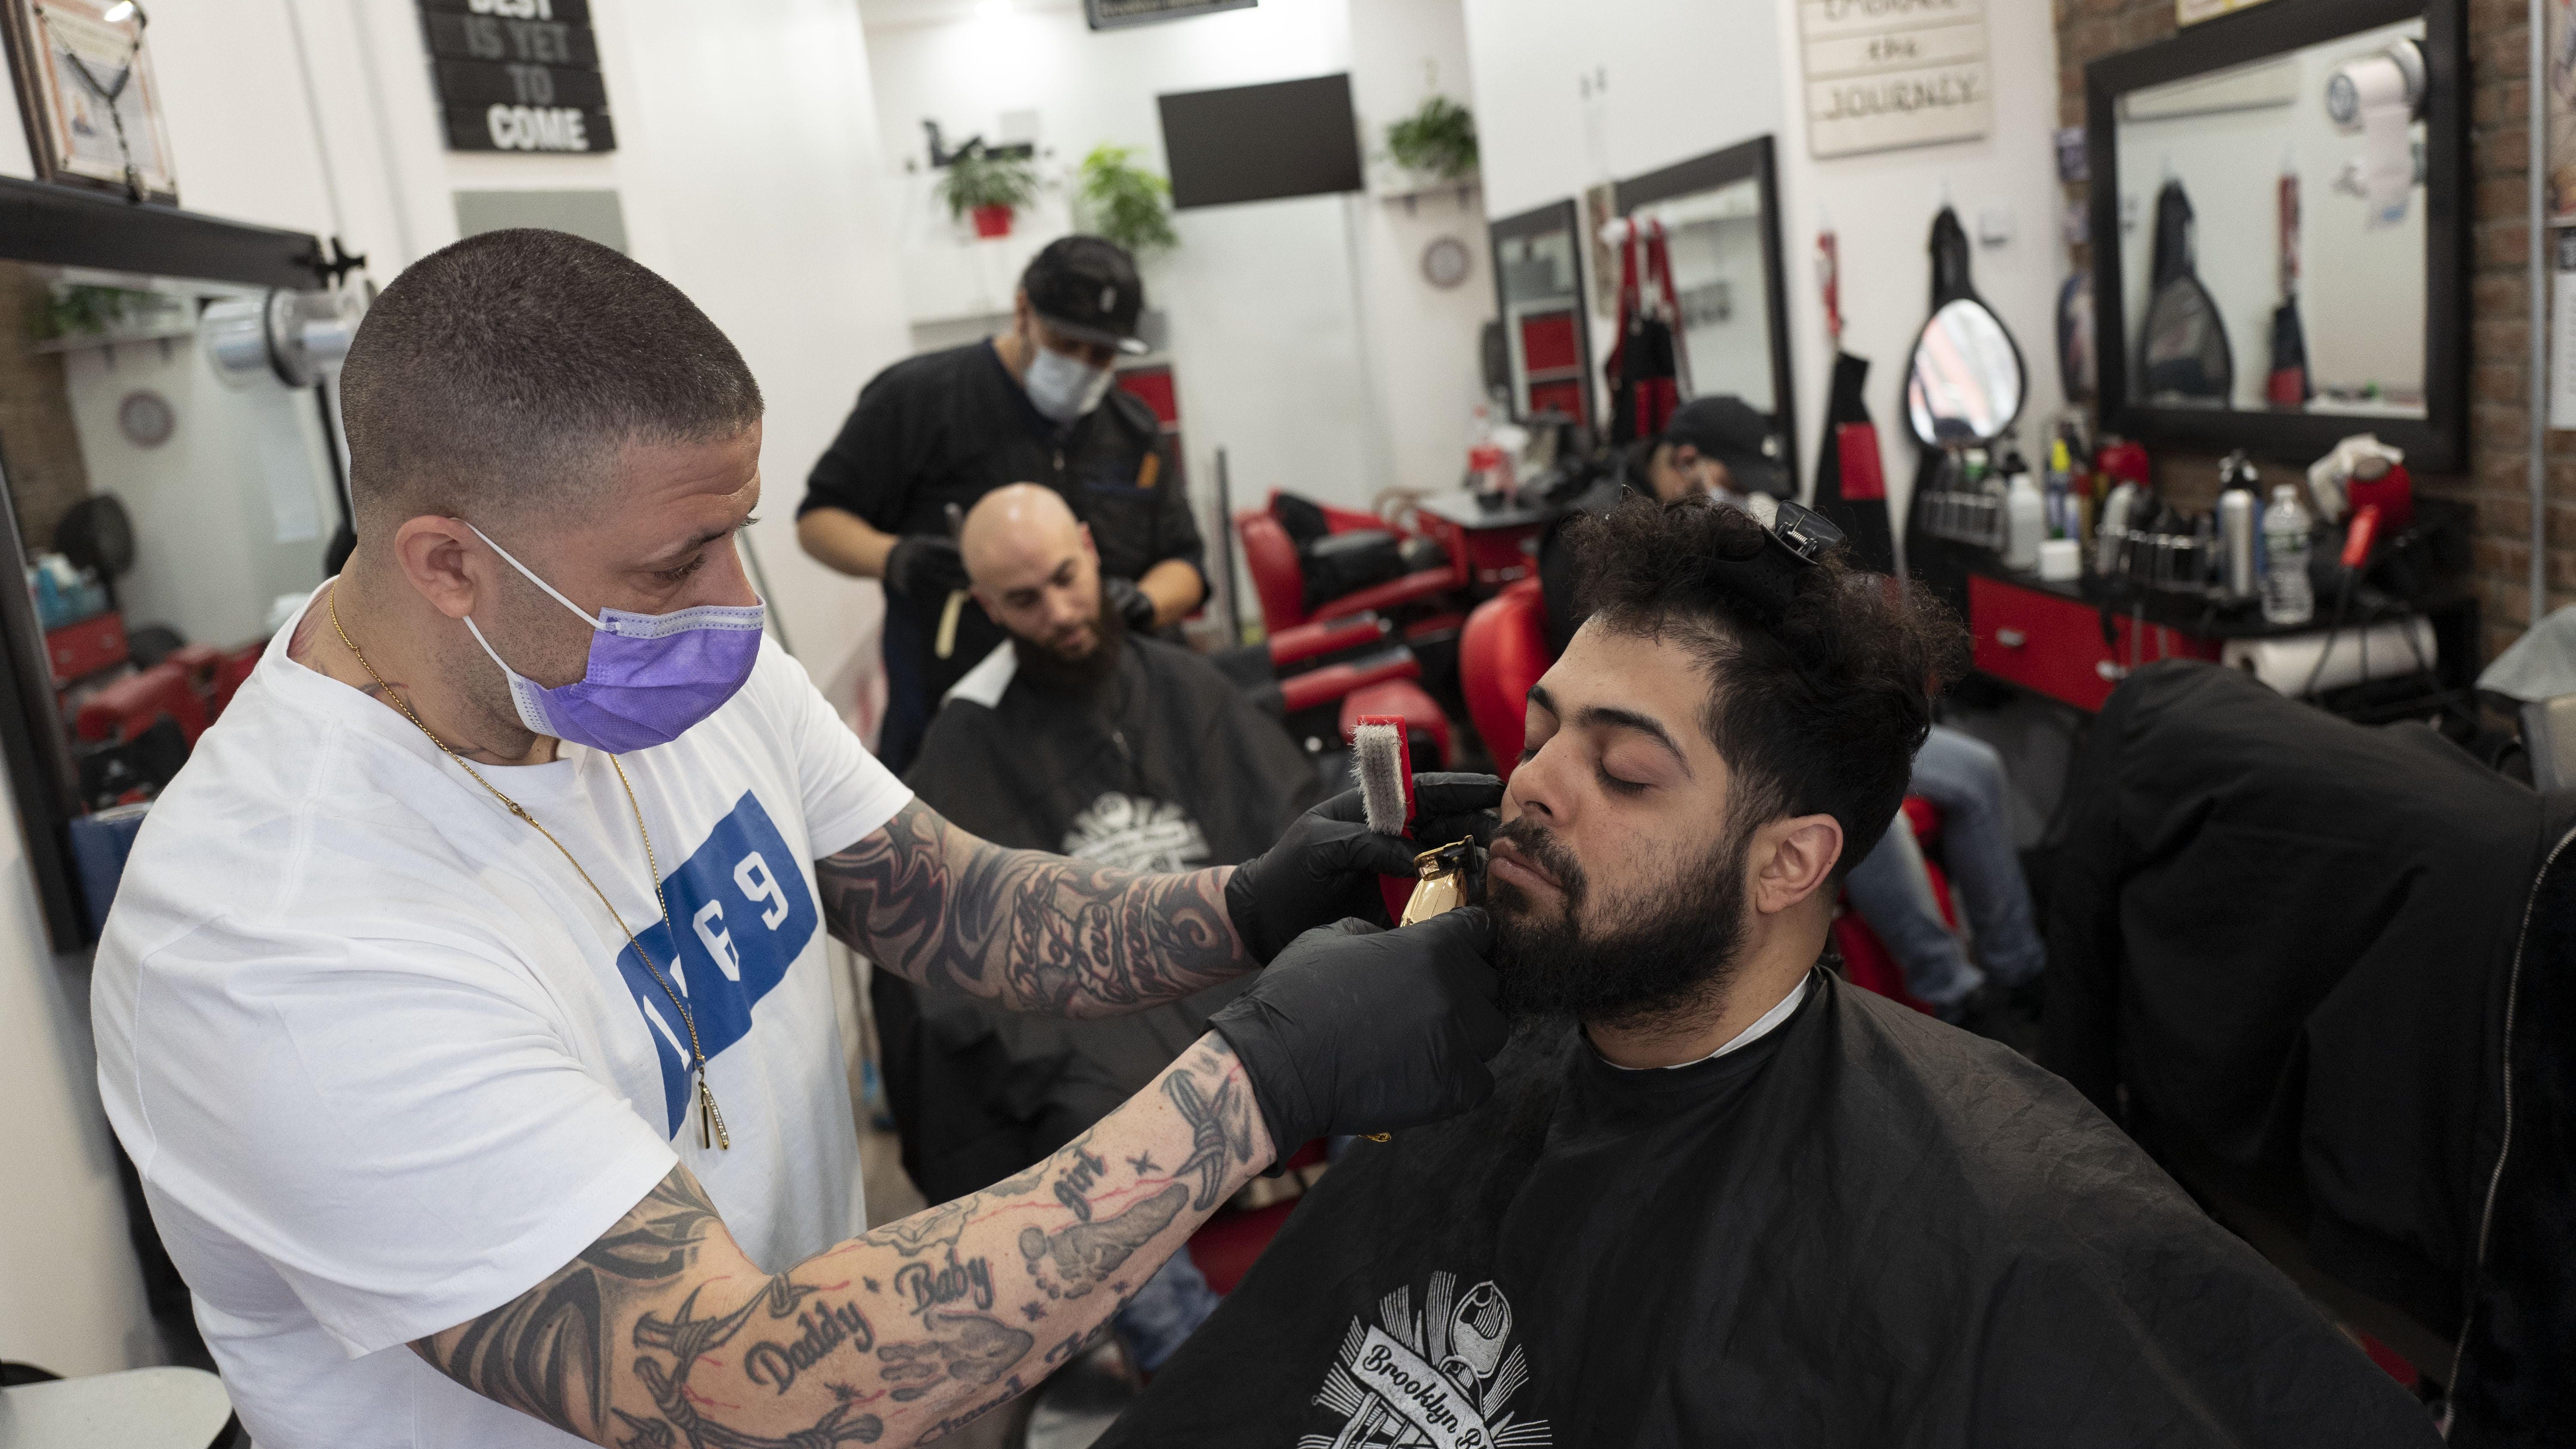 NY repeals law that made haircuts, shaves illegal on Sundays